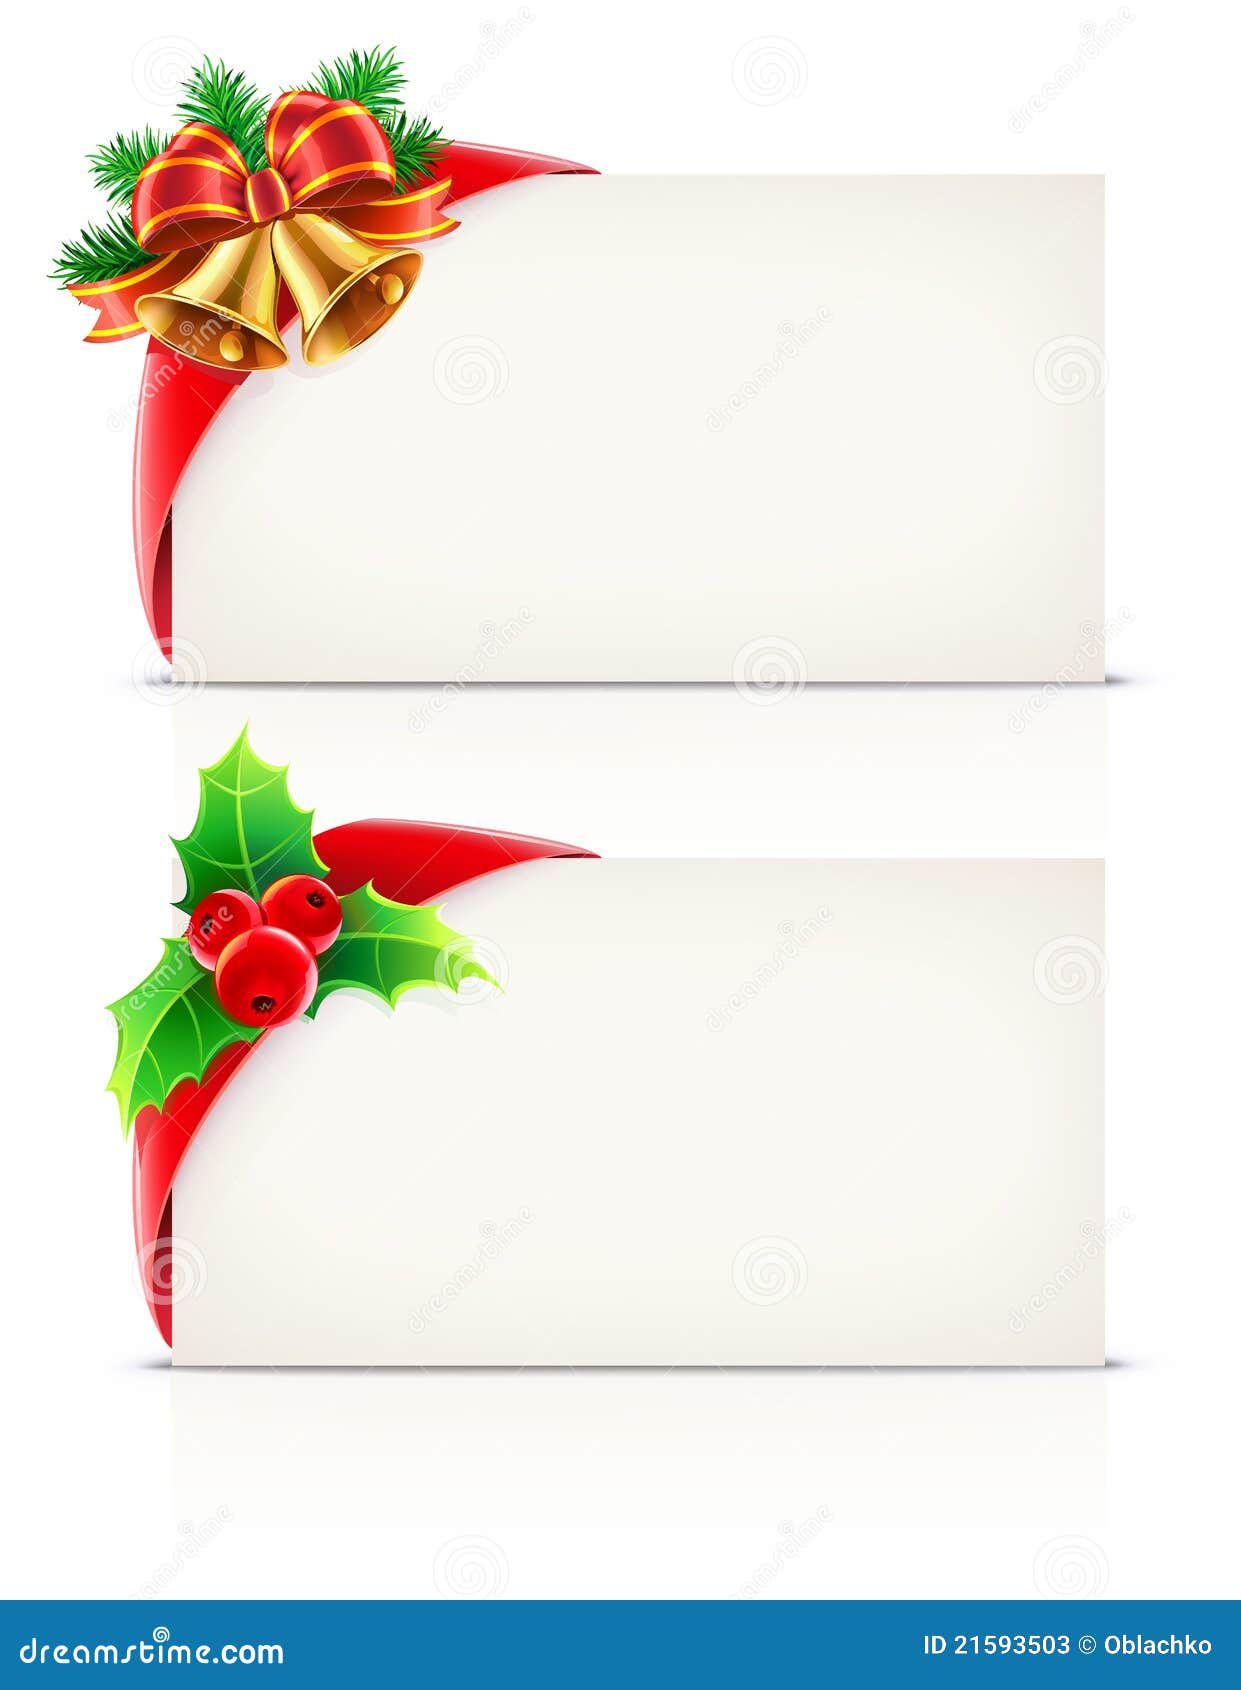 Christmas frames stock vector. Image of background, bell 